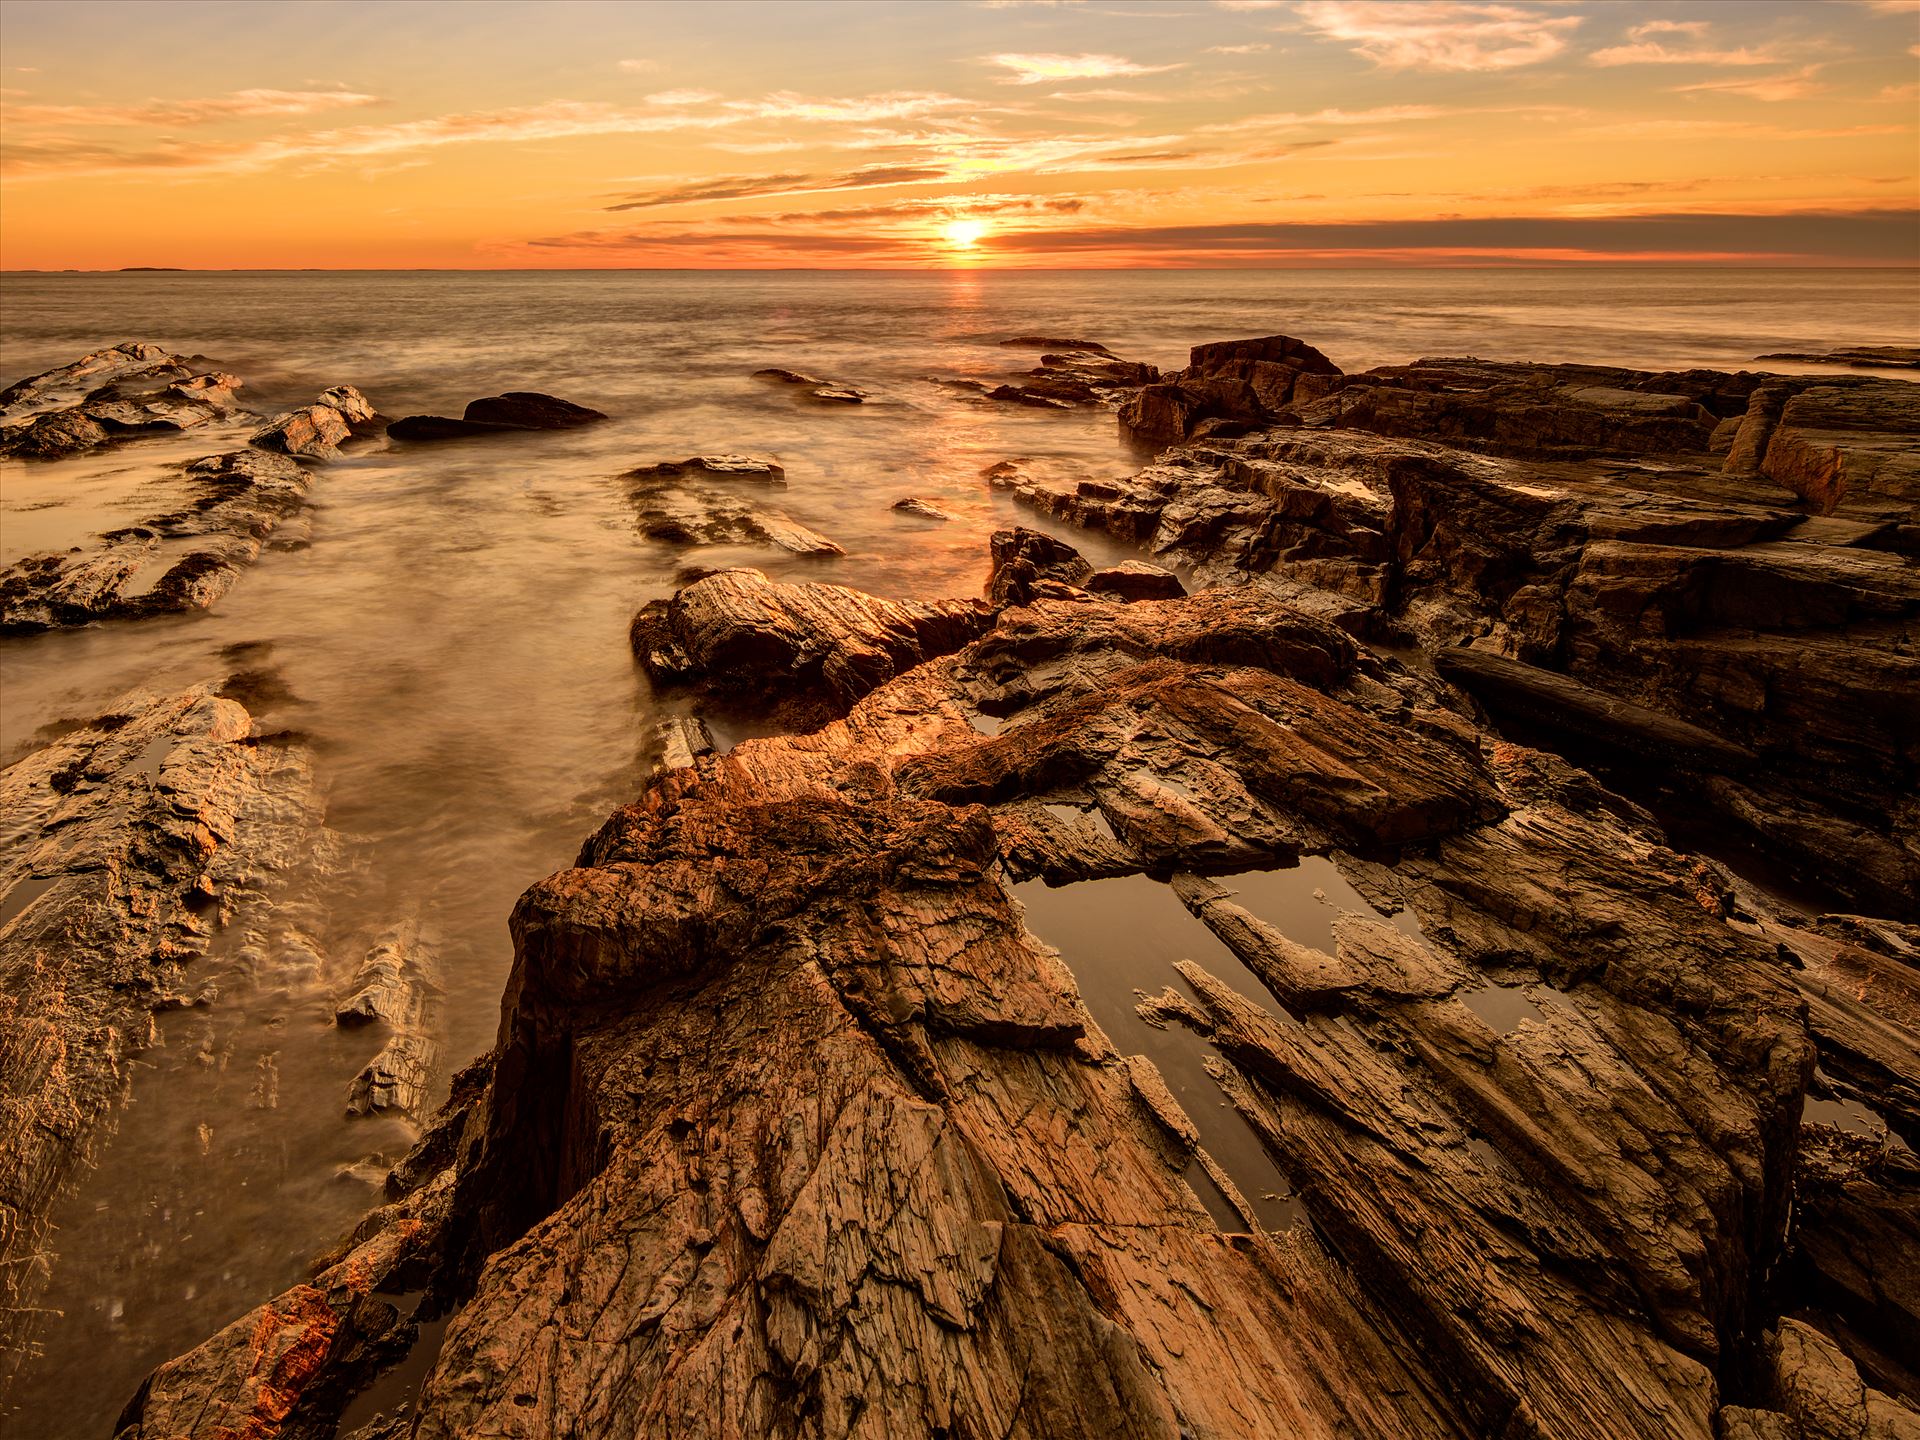 Golden sunrise illuminates a rocky outcrop near Two Lights State Park in Cape Elizabeth, Maine. - Golden sunrise illuminates a rocky outcrop near Two Lights State Park in Cape Elizabeth, Maine. by New England Photography